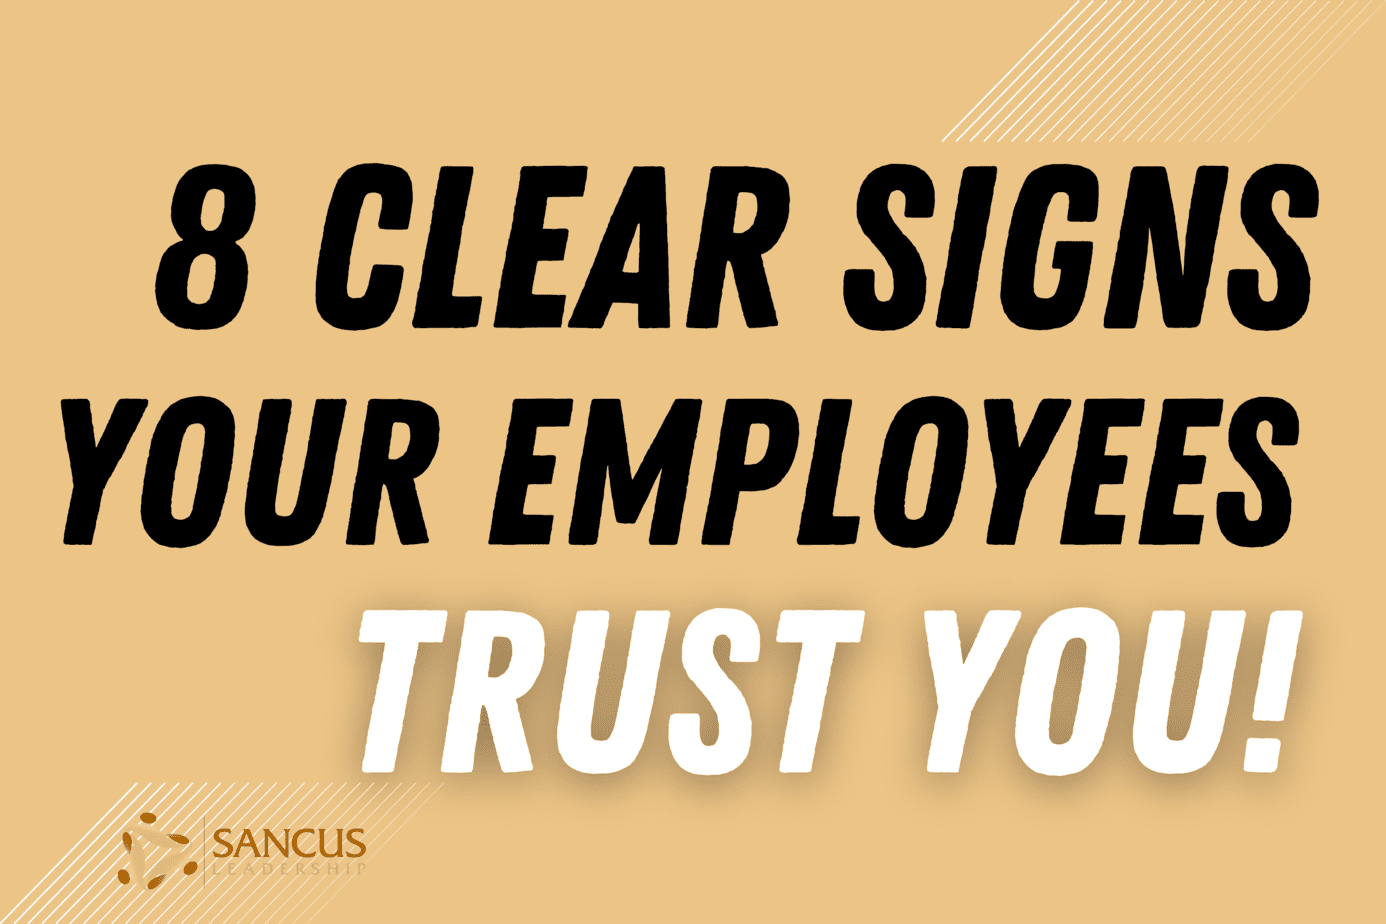 8 Clear Signs Your Employees Trust You (or Not?)